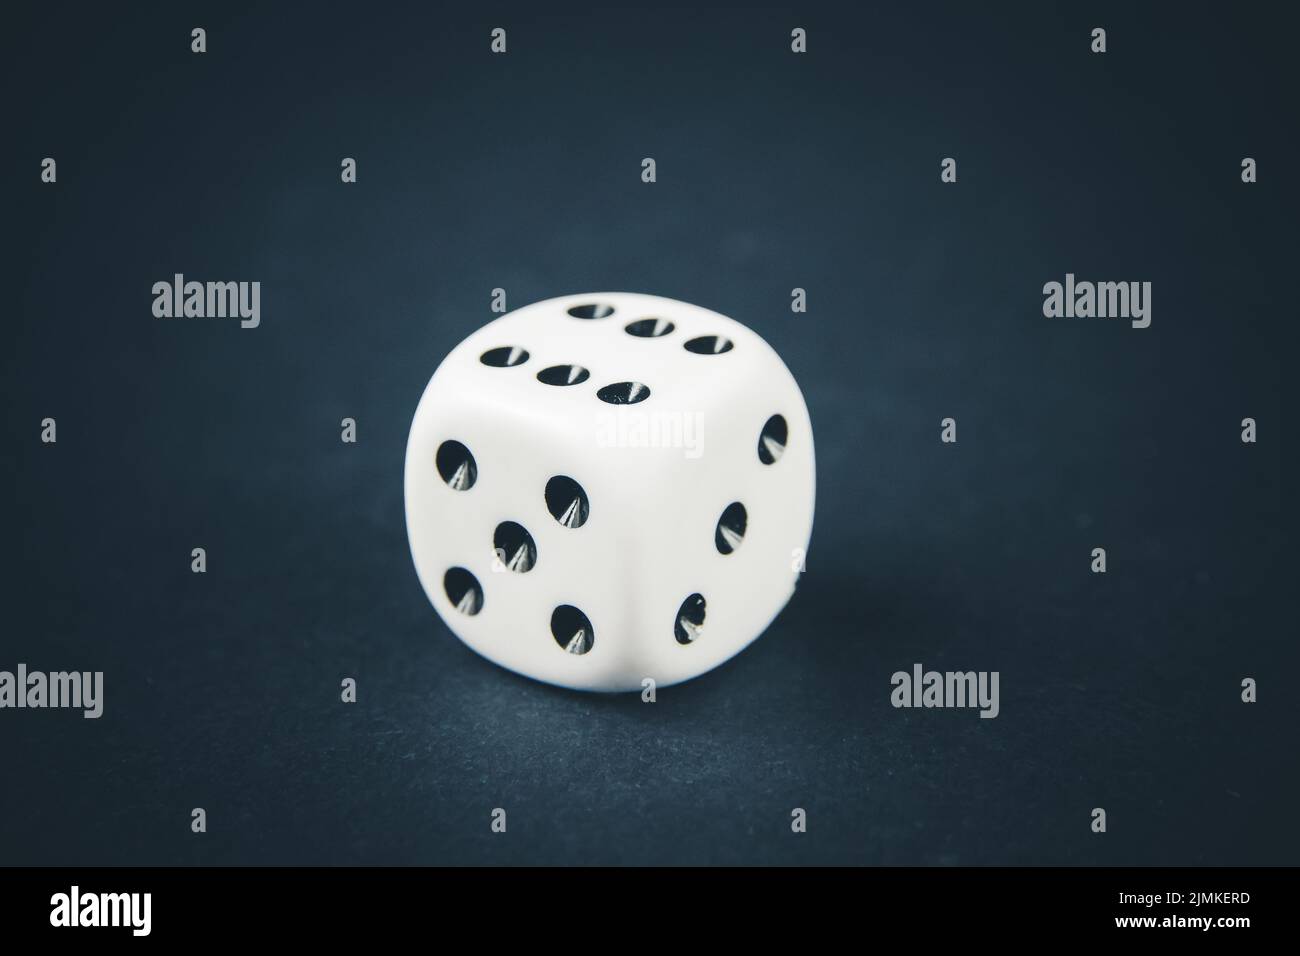 White dice on black table background Stock Photo